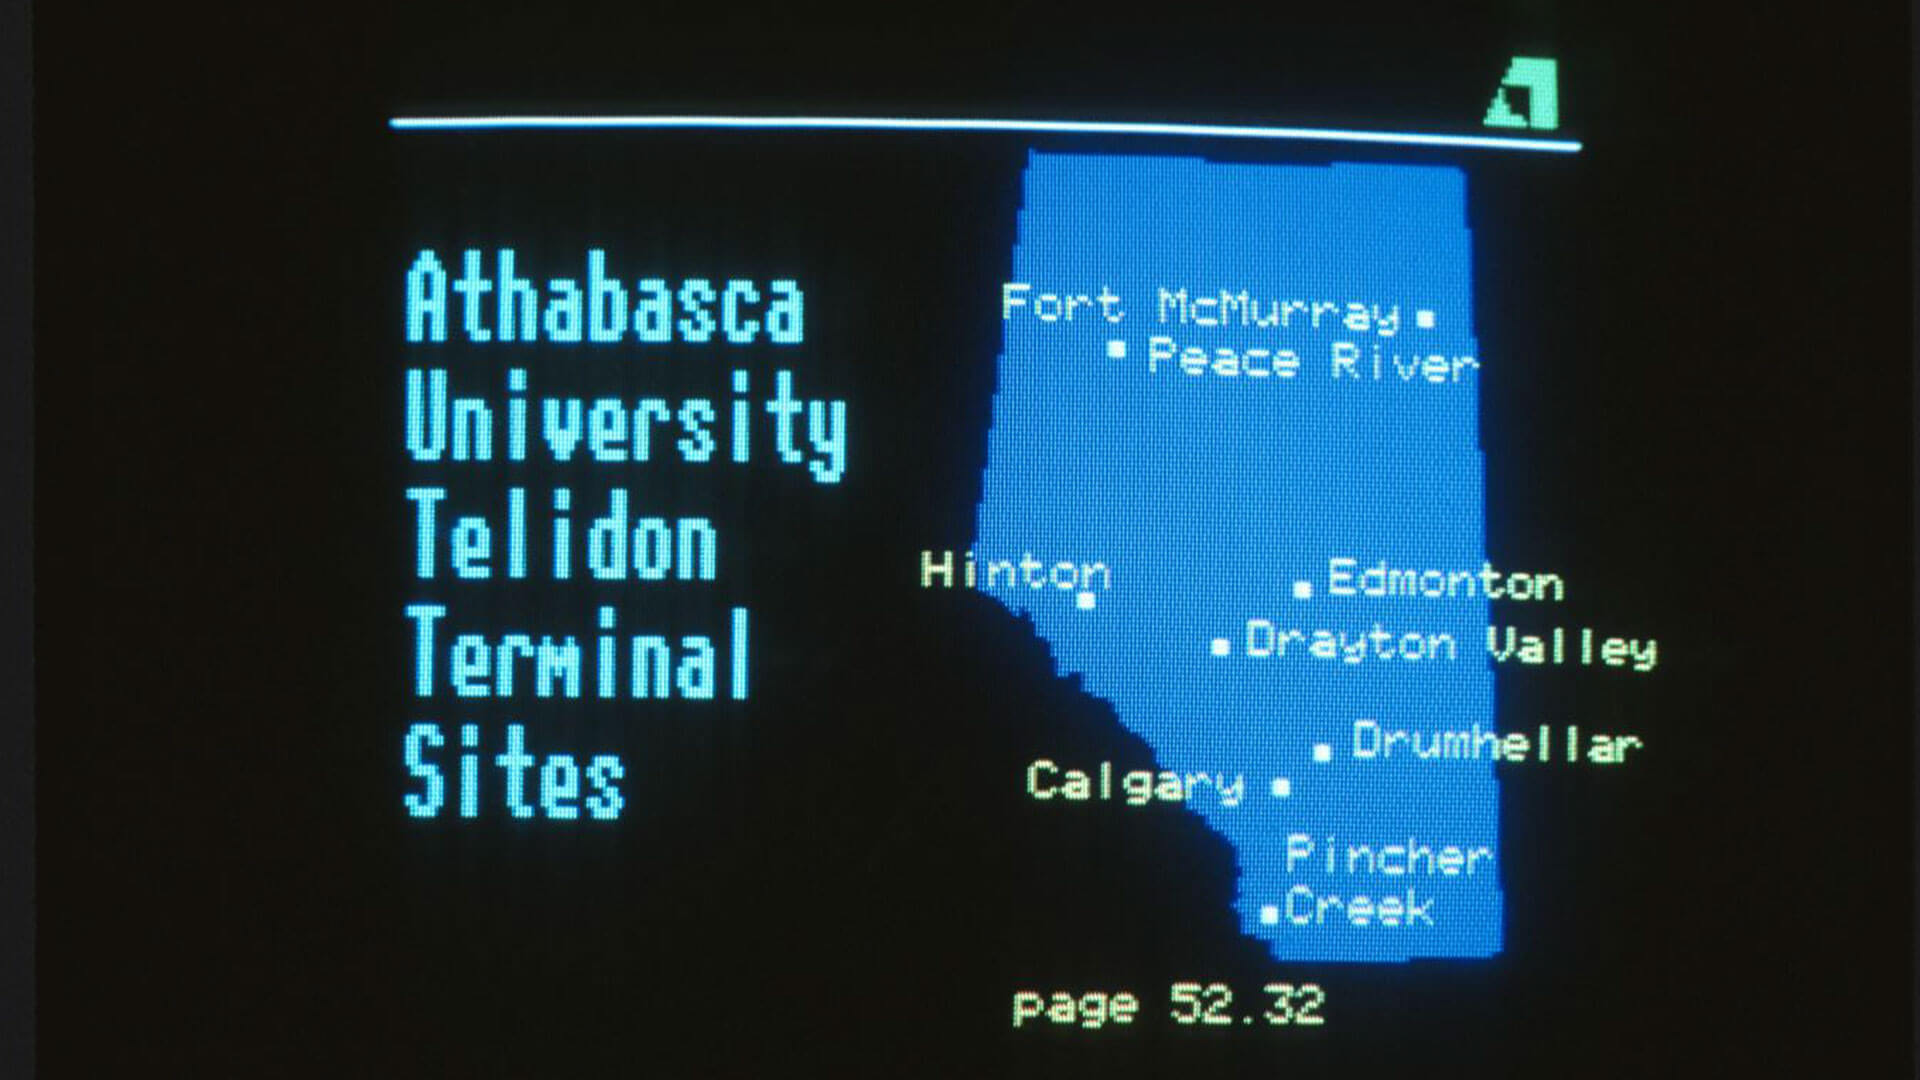 Telidon screen from the 1980s